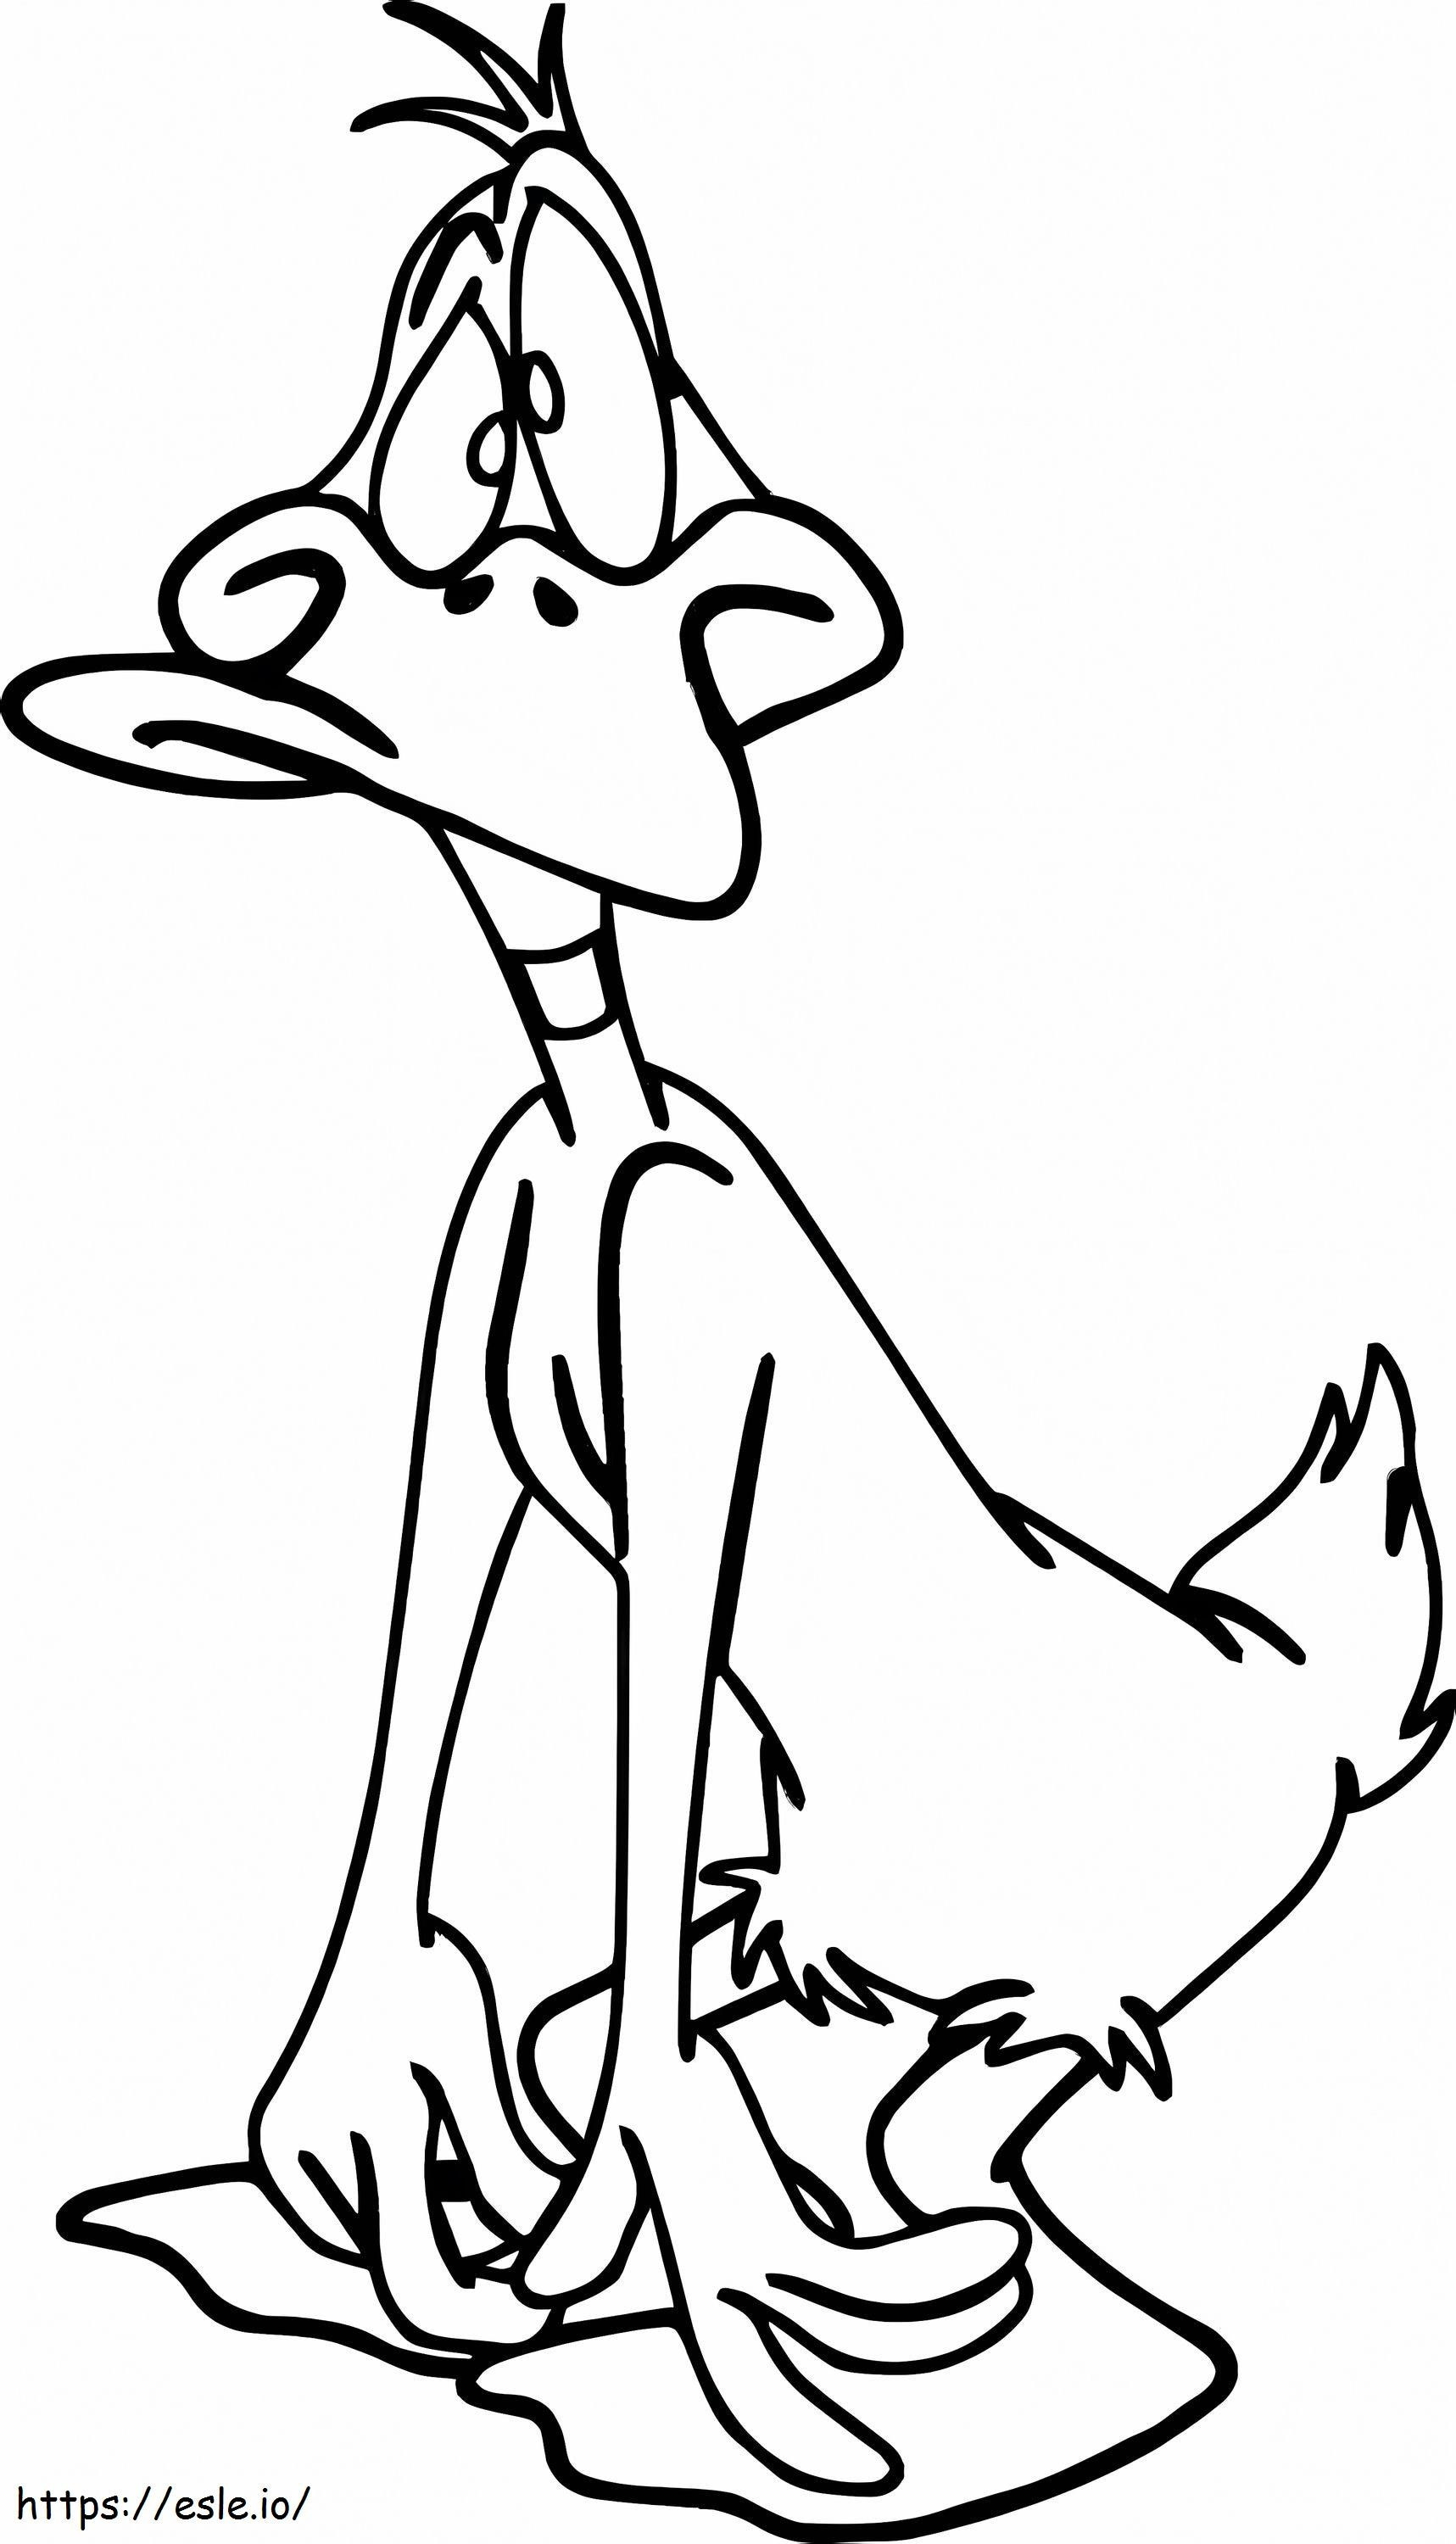 Stupid Daffy Duck coloring page